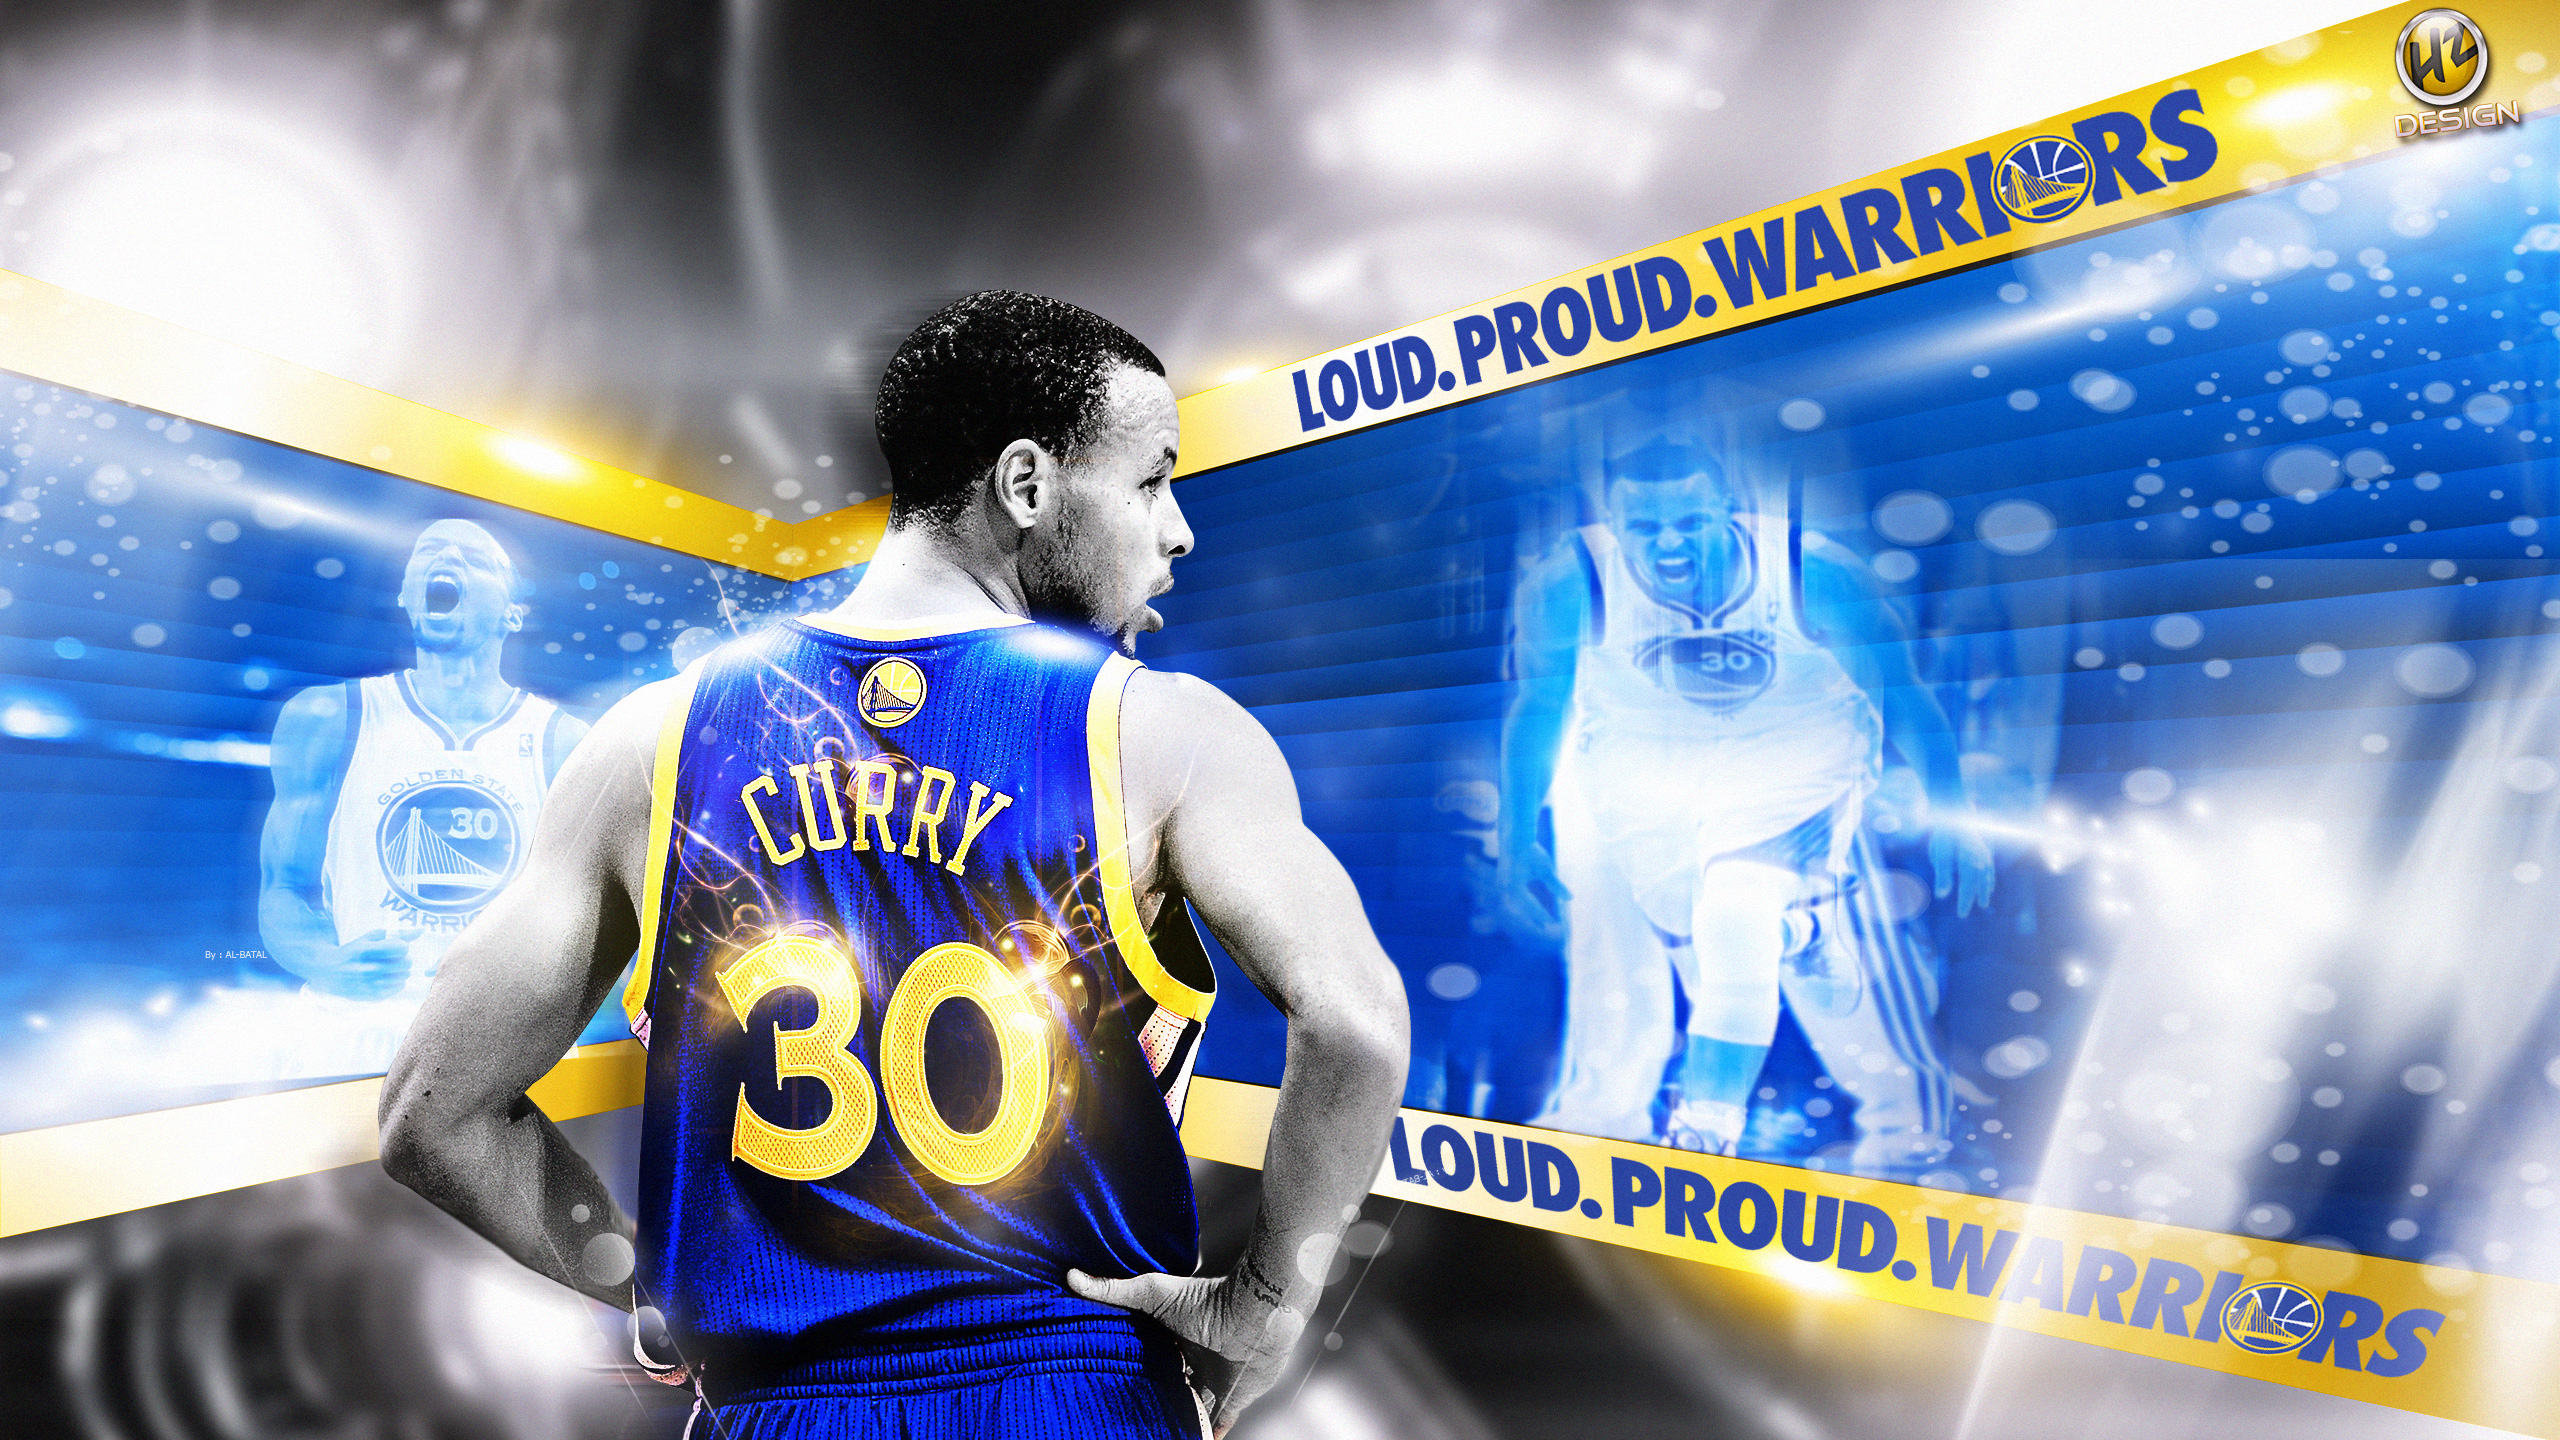 Sports Stephen Curry 2560x1440